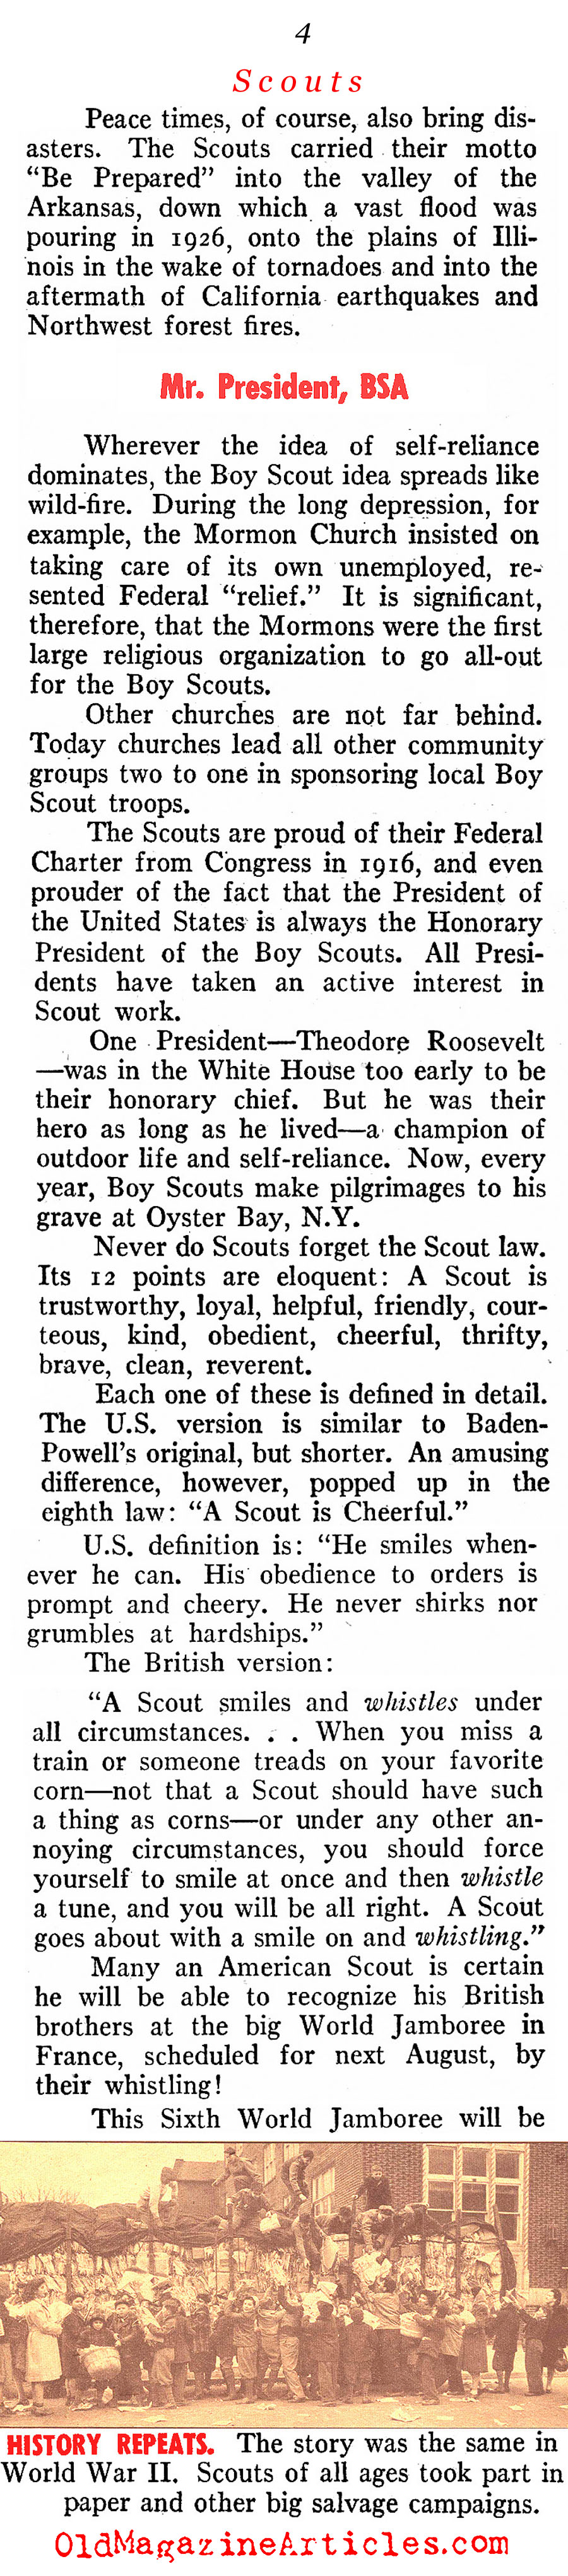 The Boy Scouts of America (Pathfinder Magazine, 1947)